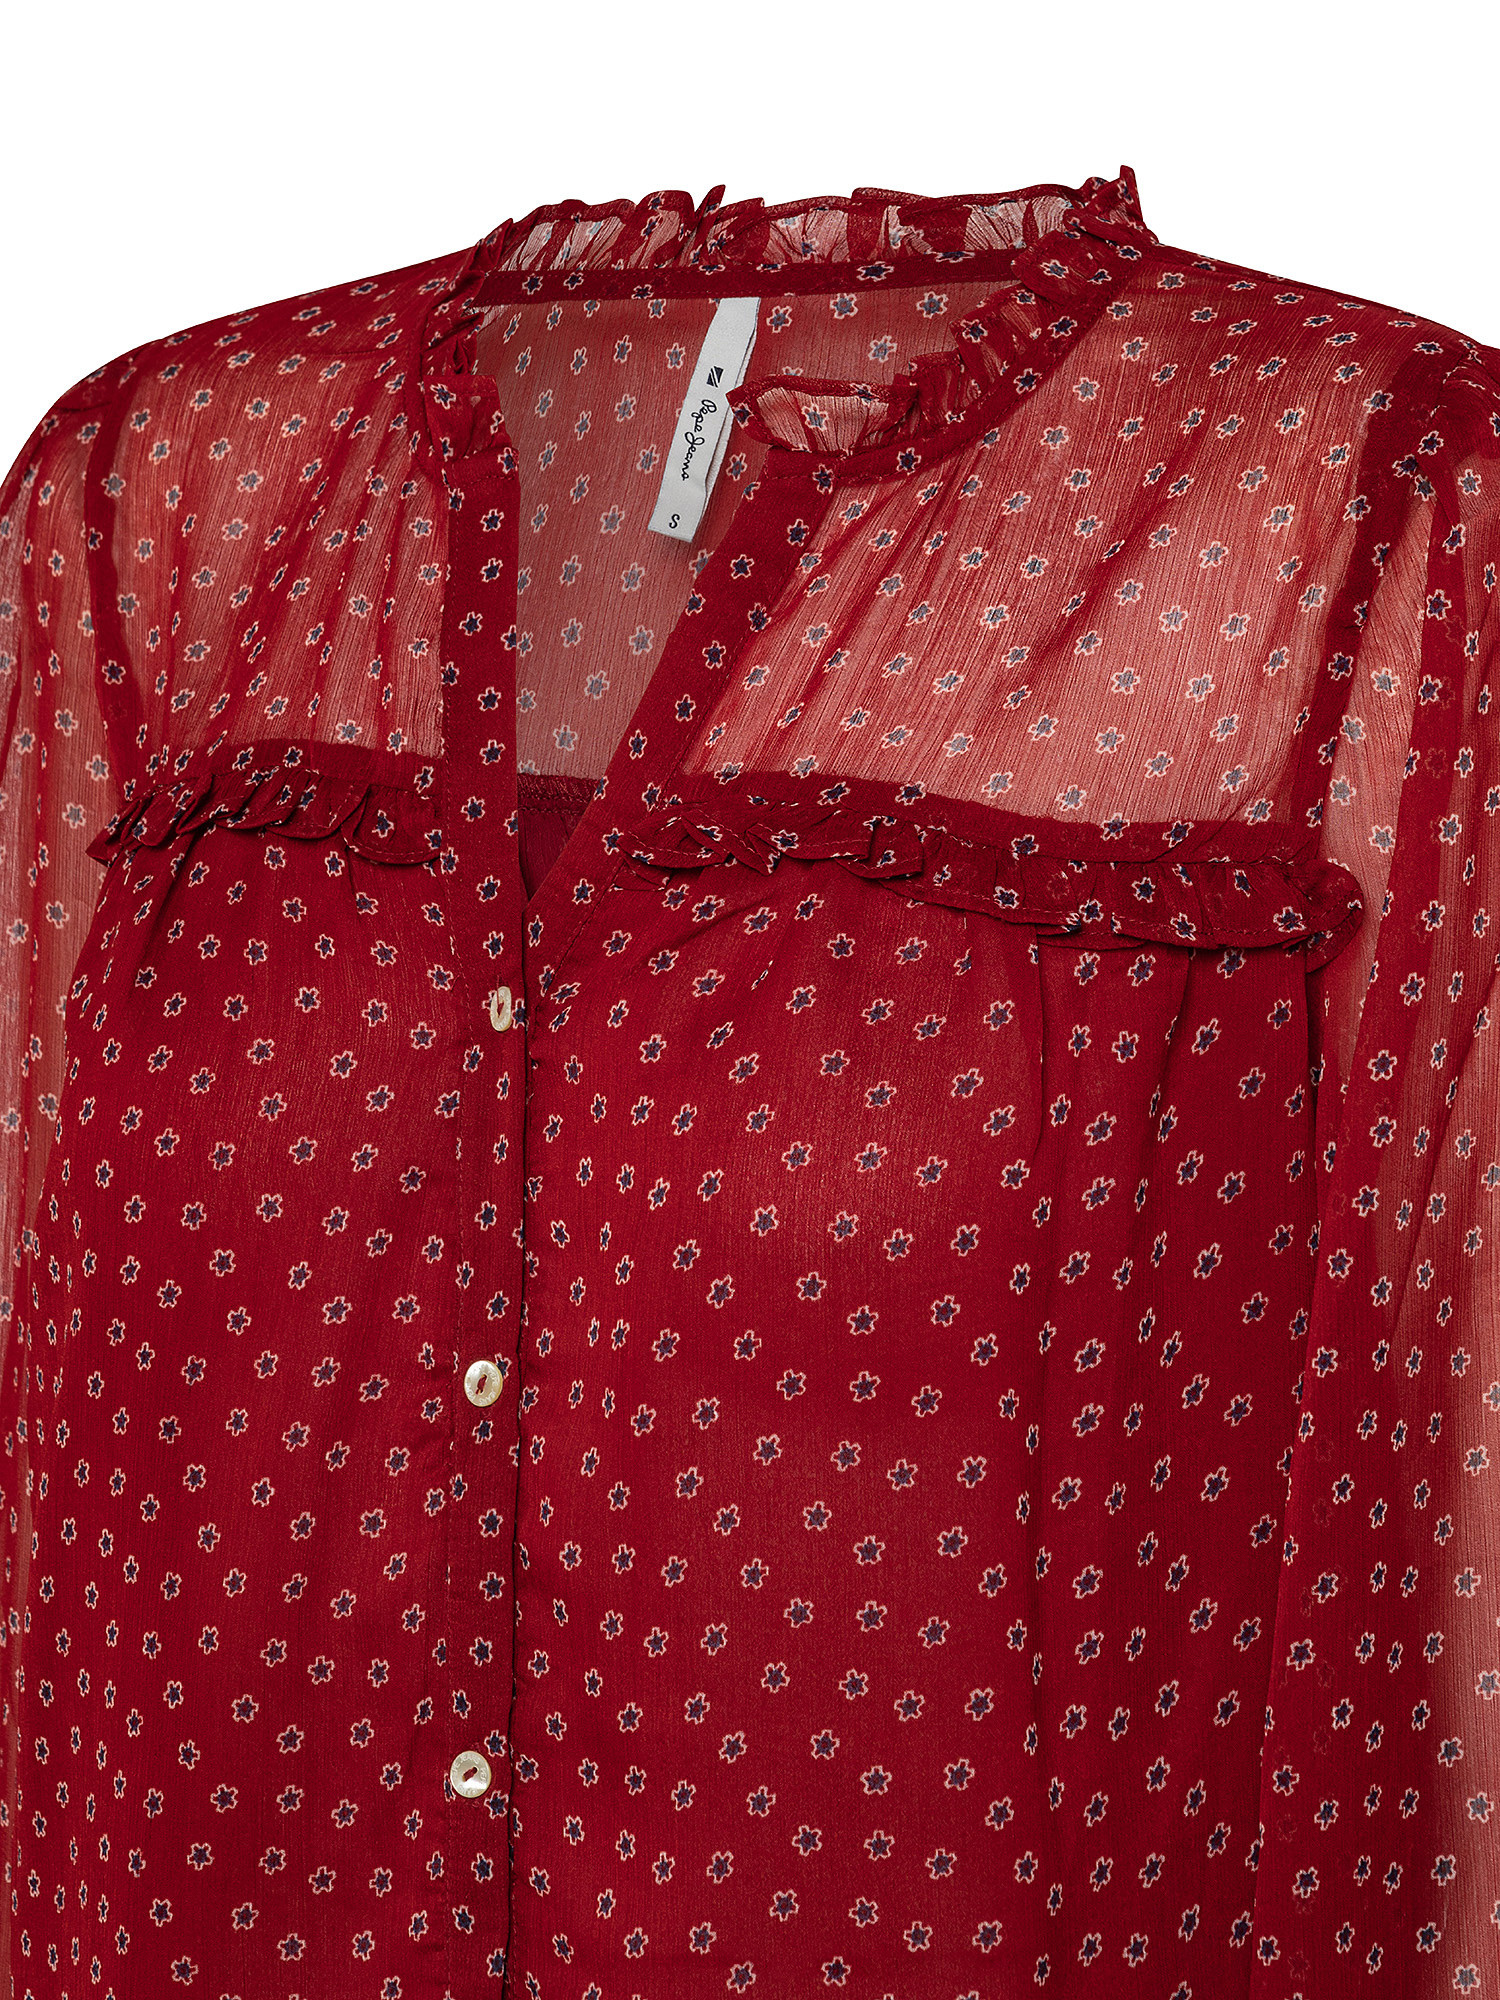 Blusa Nala con stampa floreale, Rosso, large image number 2